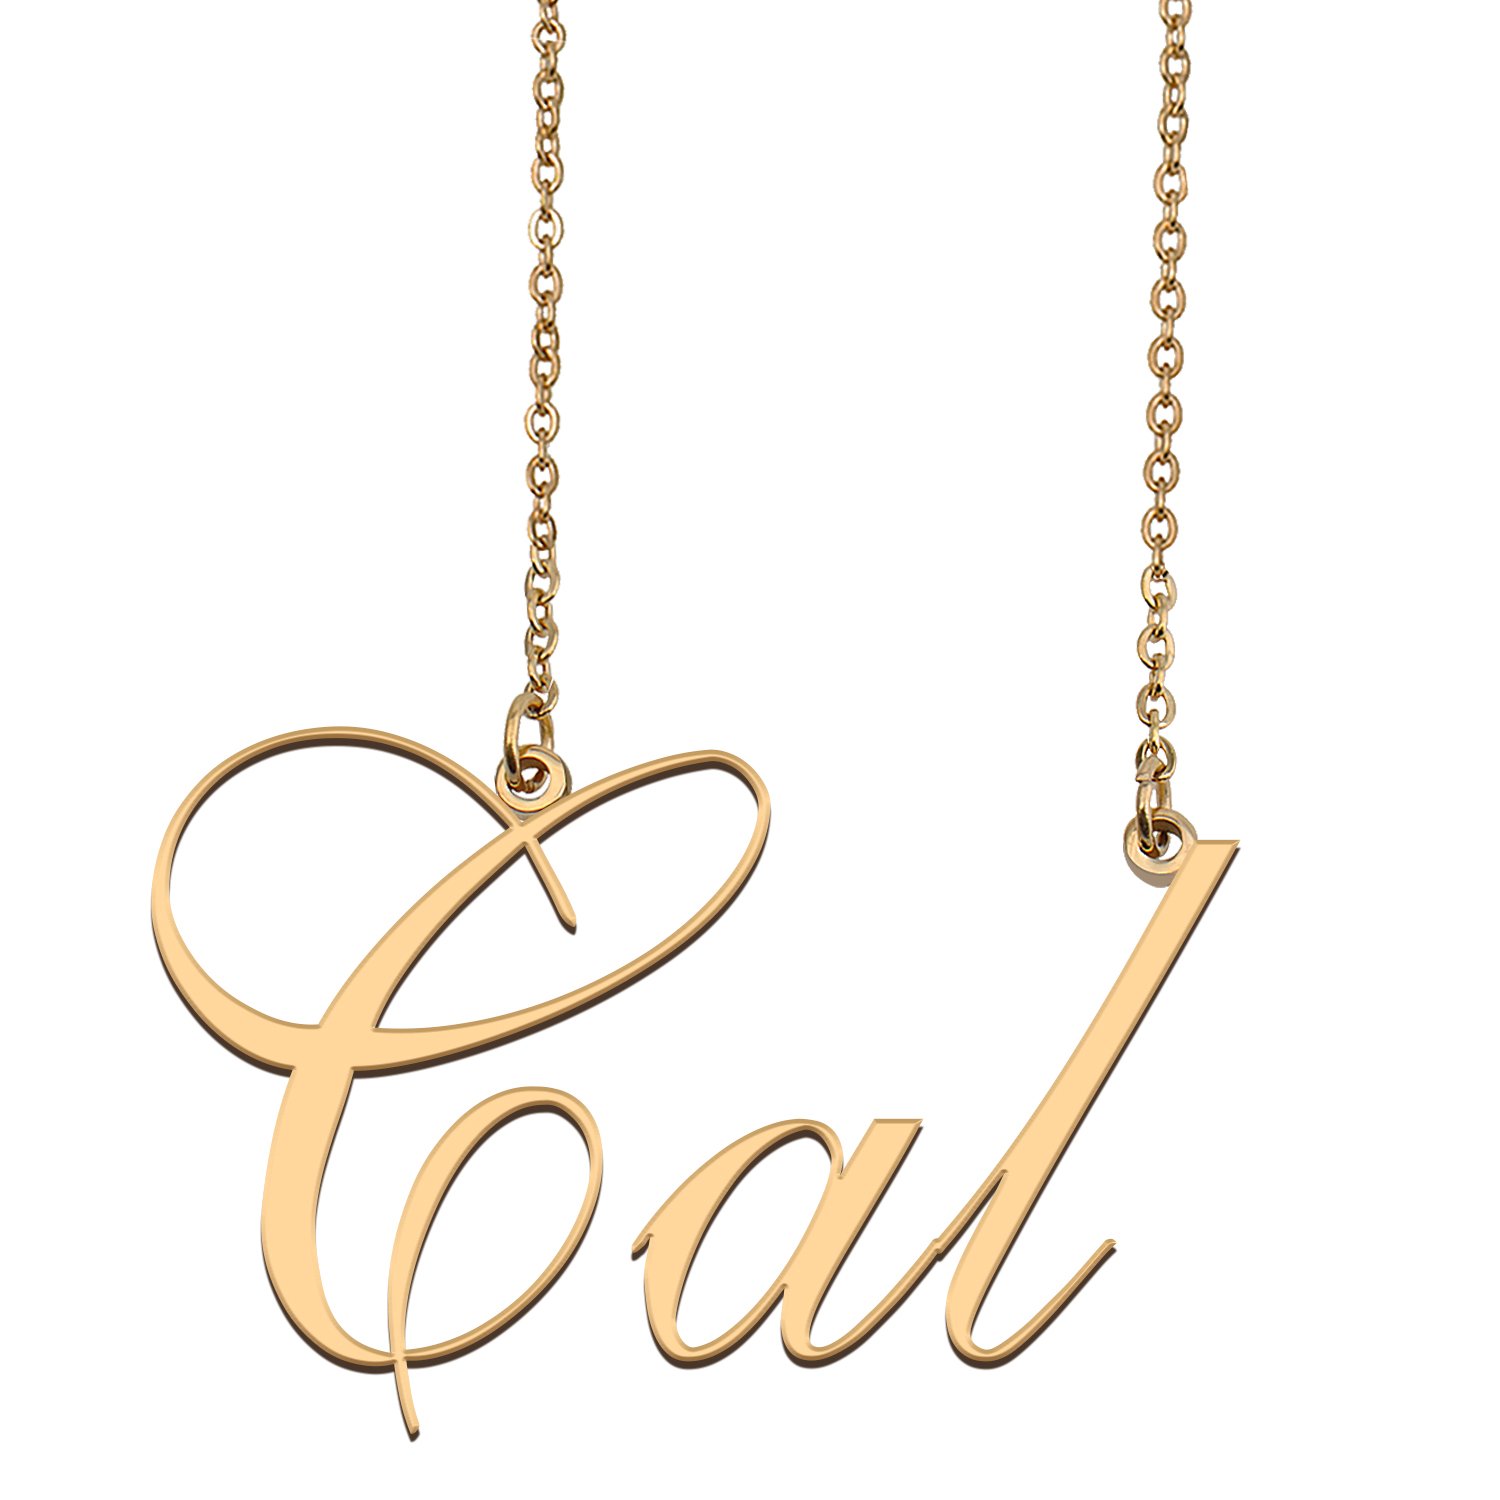 Custom Nameplate Necklace Personalized Jewelry Gifts for Women Cal